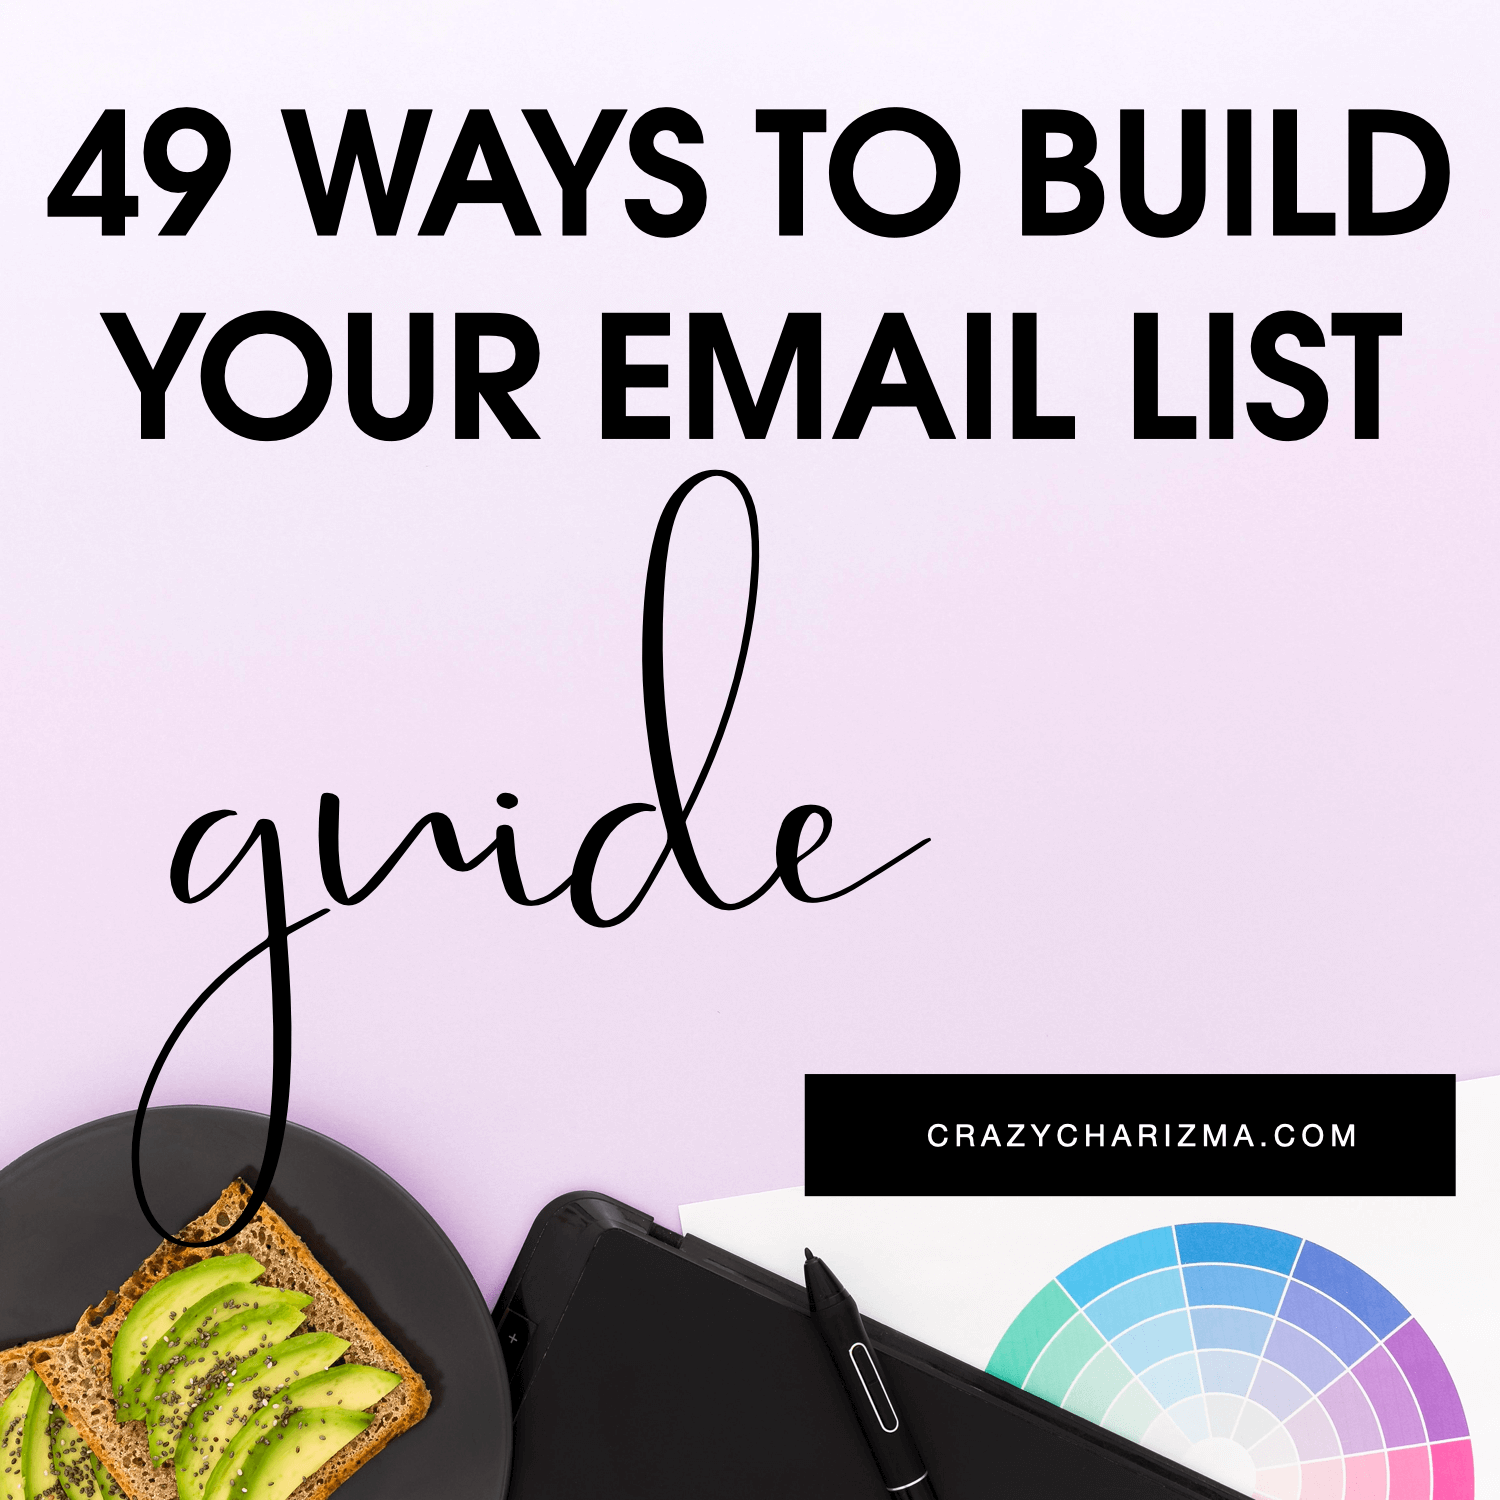 Email list buidling guide